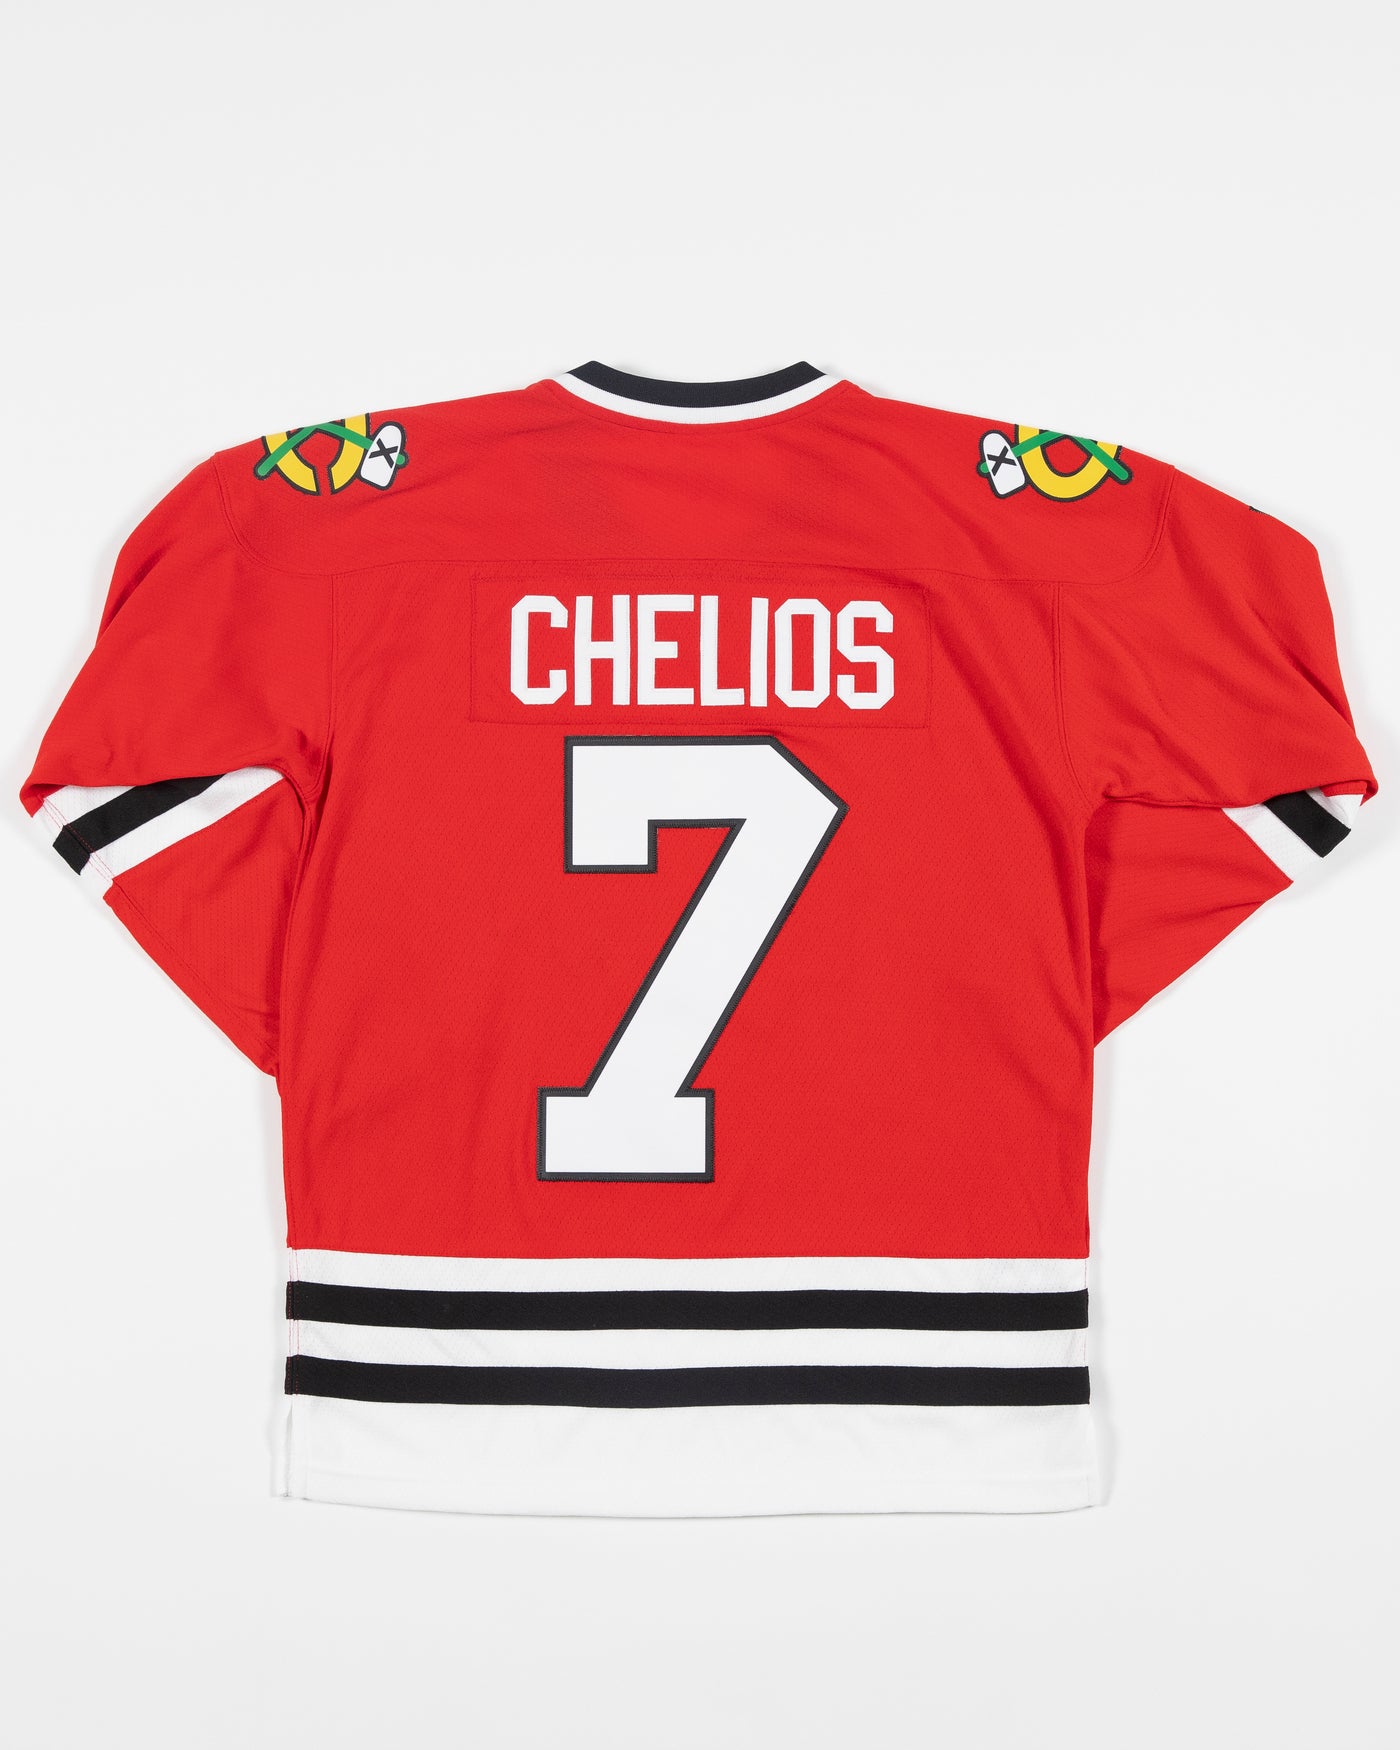 Mitchell & Ness Chelios throwback jersey - back lay flat